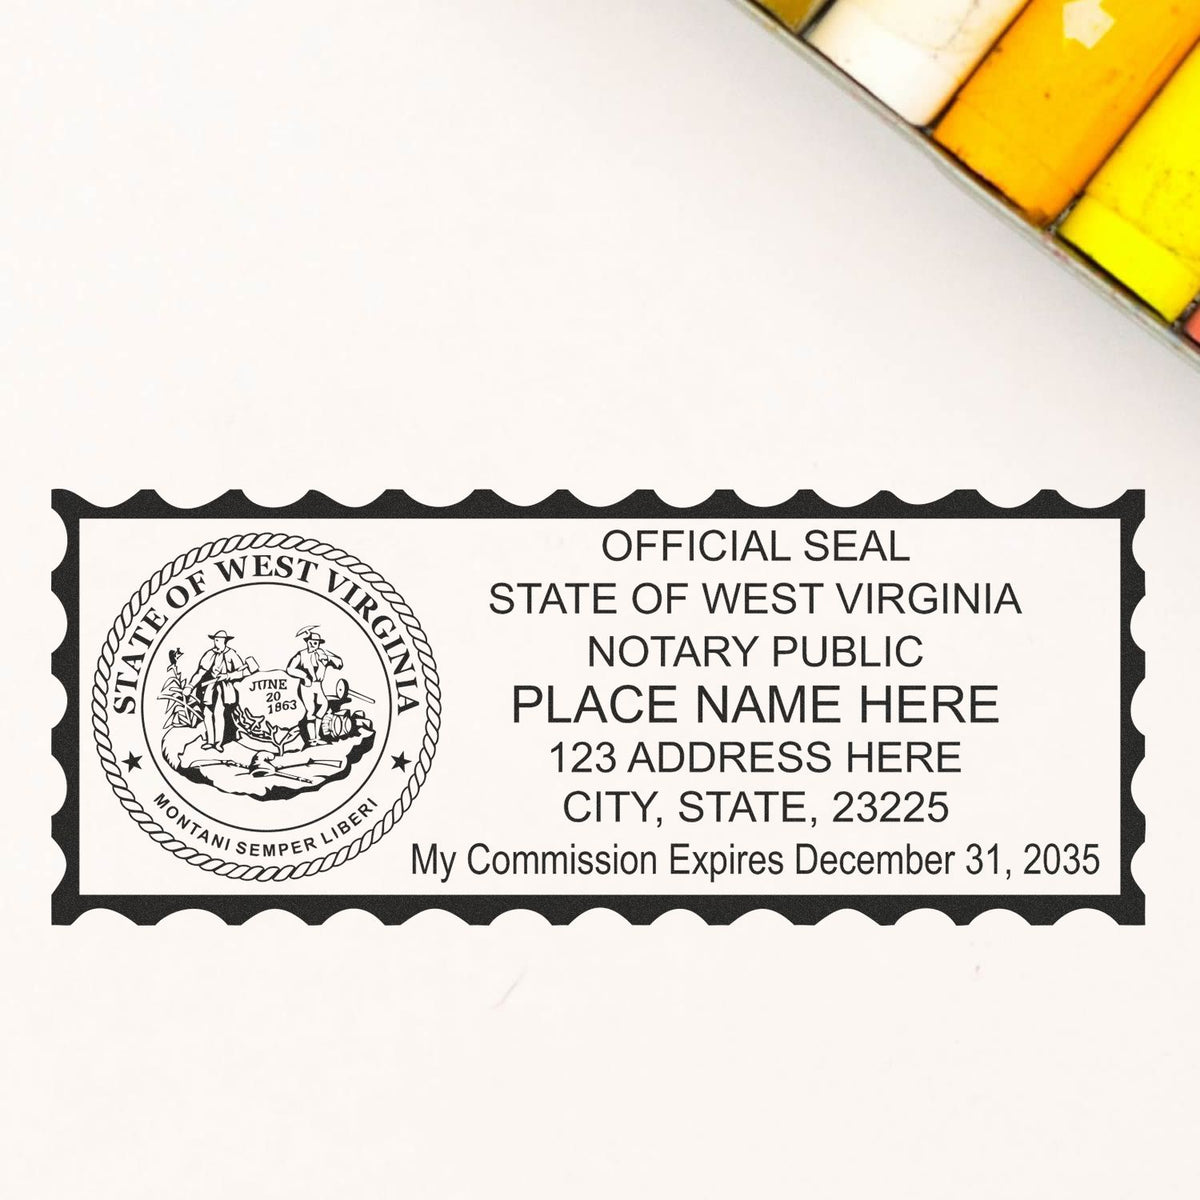 The Slim Pre-Inked State Seal Notary Stamp for West Virginia stamp impression comes to life with a crisp, detailed photo on paper - showcasing true professional quality.